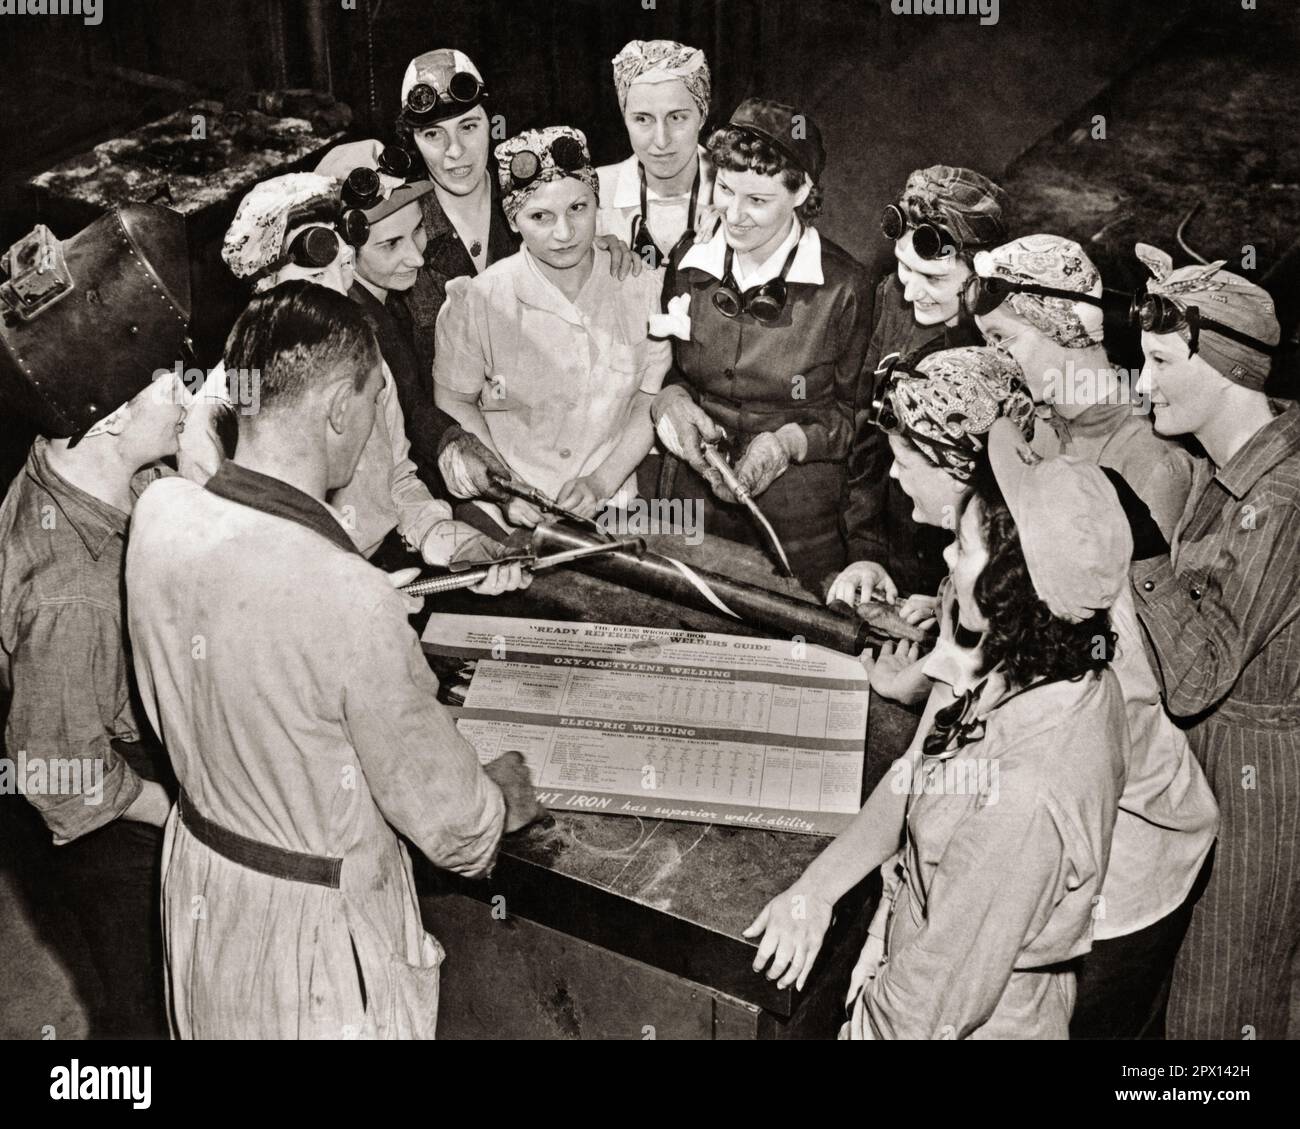 1940s WOMEN IN A WELDING CLASS AT THE BEGINNING OF WORLD WAR 2 HOPING TO SPEED PRODUCTION AND ASSIST IN THE WAR EFFORT  - q6154 CPC001 HARS CONFLICT FEMALES WW2 JOBS COPY SPACE HALF-LENGTH LADIES PERSONS GOGGLES MALES CONFIDENCE B&W SKILL OCCUPATION SKILLS HOME FRONT HIGH ANGLE ADVENTURE AND EFFORT EXCITEMENT WORLD WARS LABOR PRIDE WORLD WAR WORLD WAR TWO WORLD WAR II OPPORTUNITY EMPLOYMENT FEMININE OCCUPATIONS WARTIME WELDING HOPING HEAD SCARF FEMINISM WORLD WAR 2 ASSIST EMPLOYEE WELDERS COOPERATION DEFENSE BEGINNING BLACK AND WHITE CAUCASIAN ETHNICITY LABORING OLD FASHIONED WORK CLOTHES Stock Photo